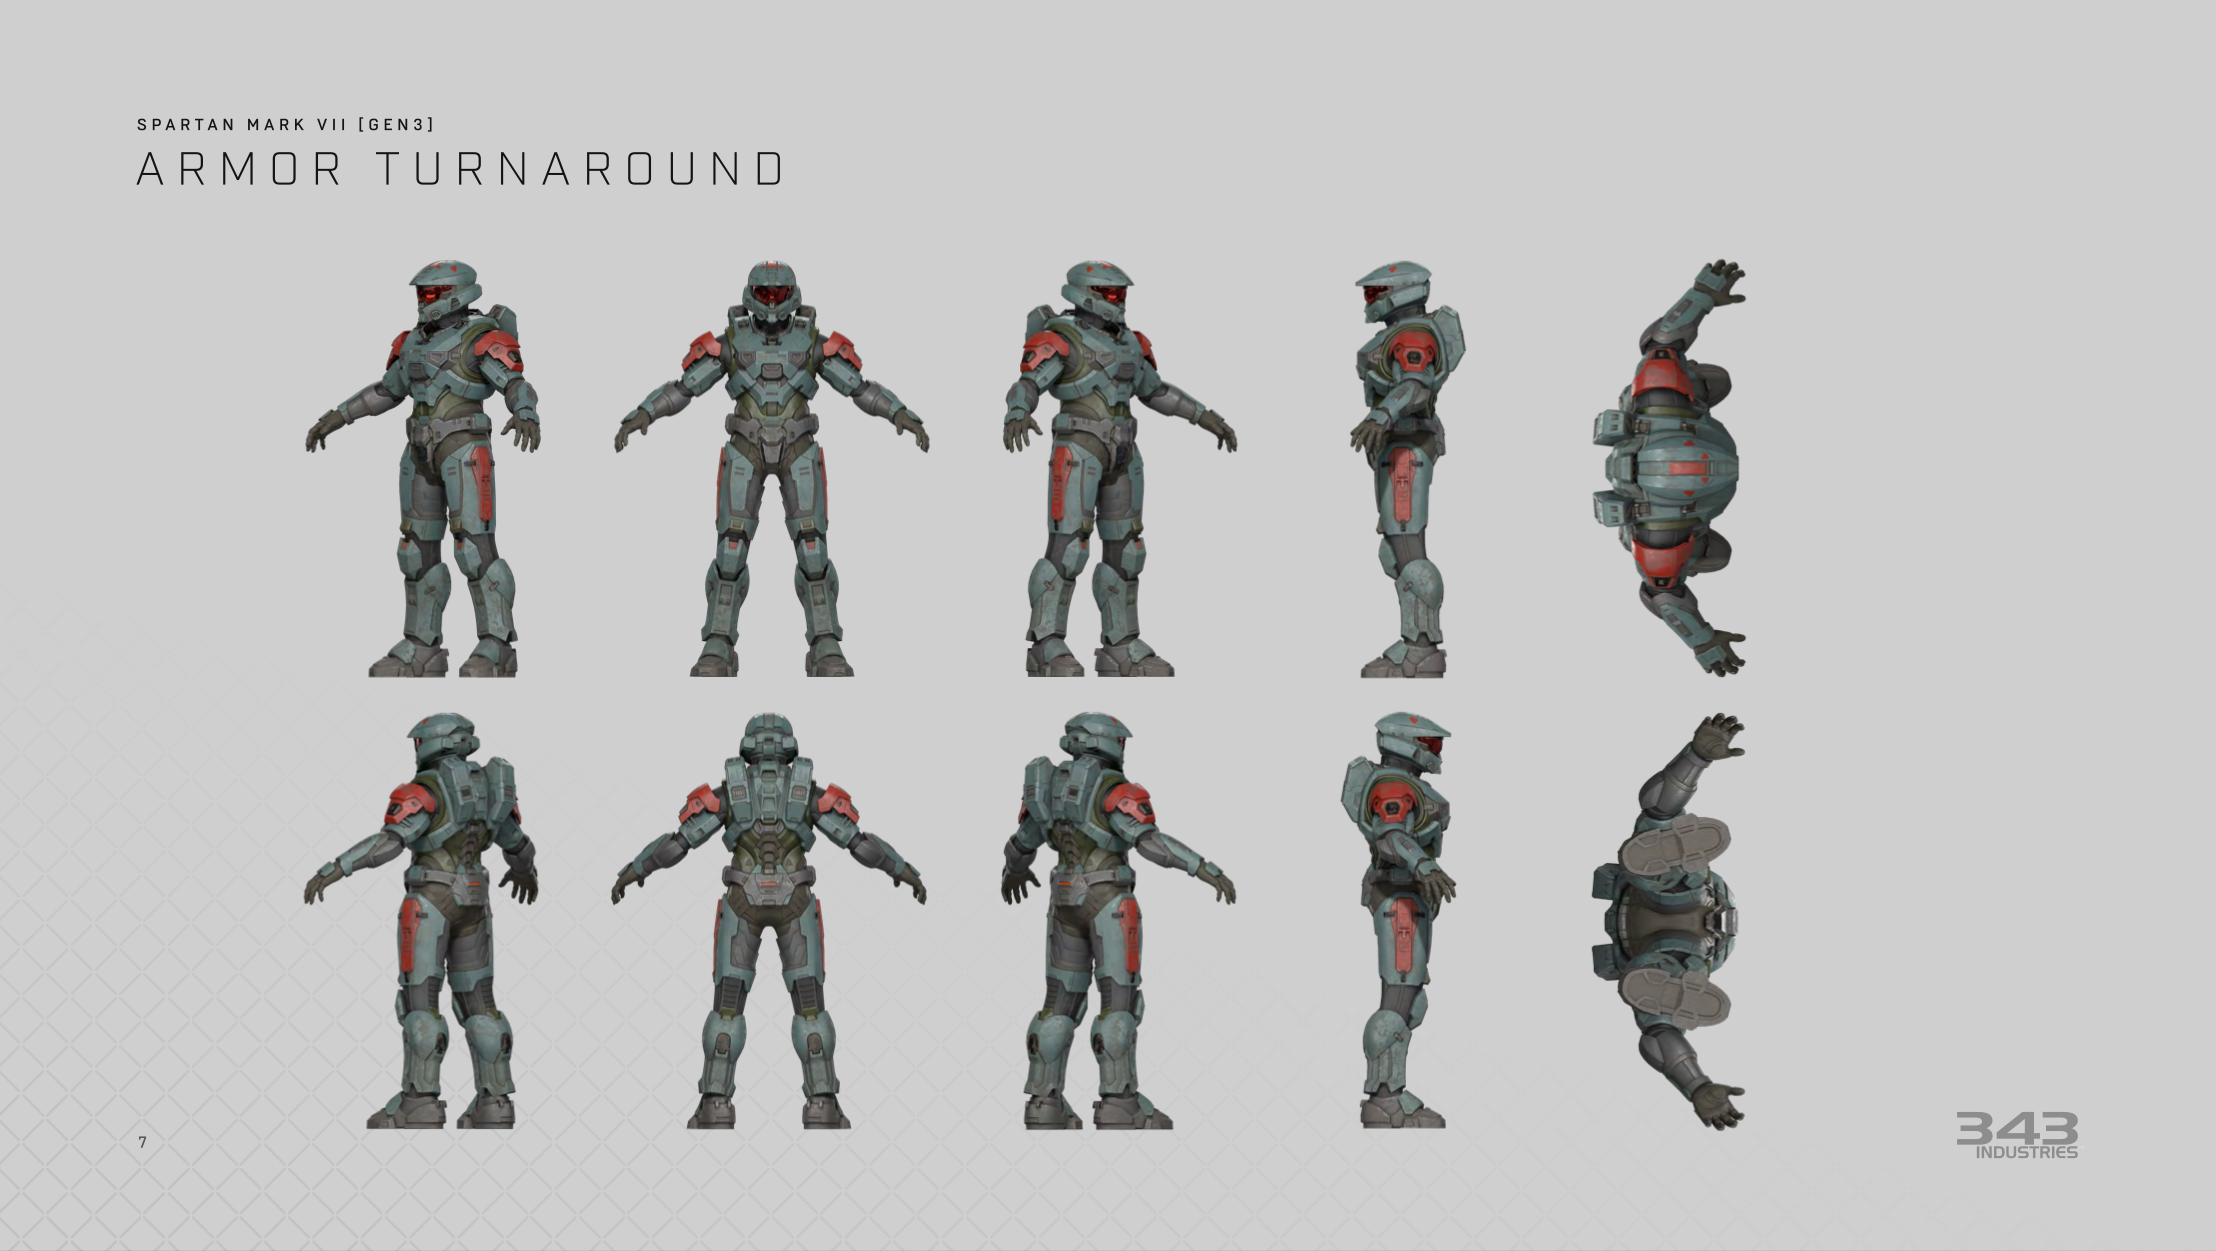 Images Courtesy Microsoft/343 Industries